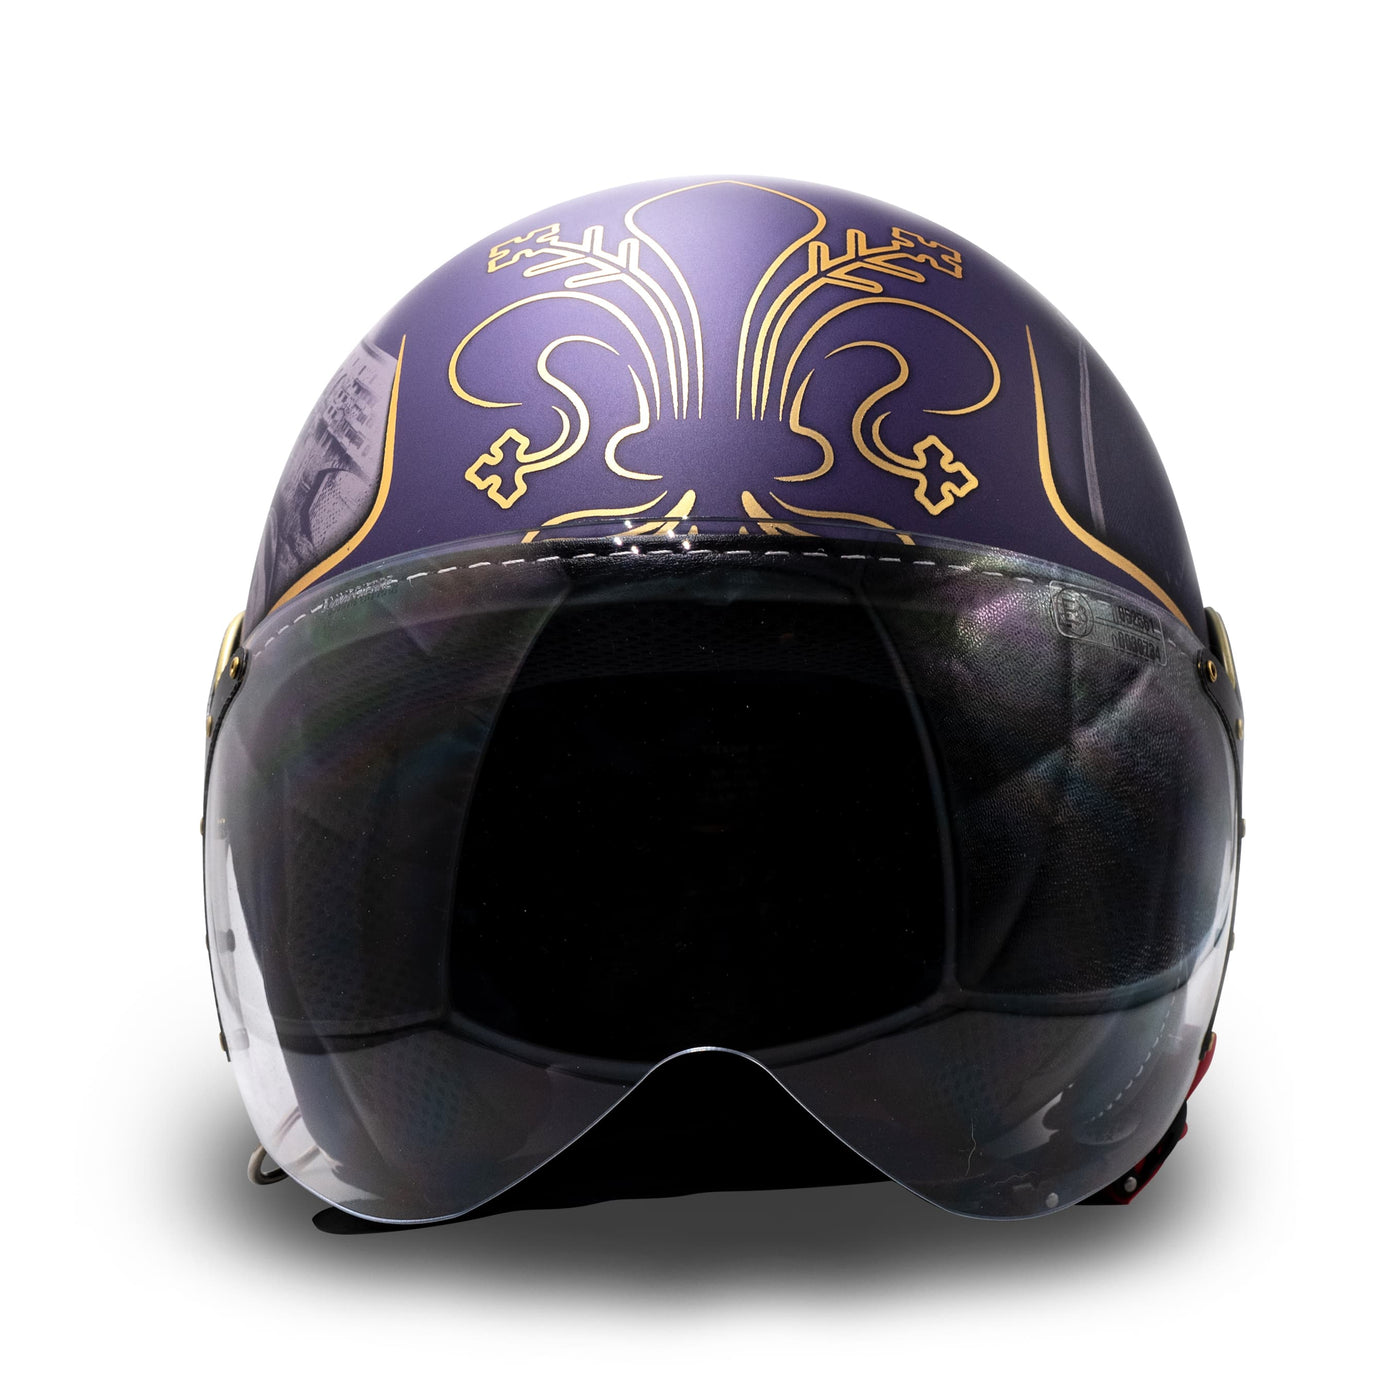 Casque Florence LIMITED EDITION MM Independent